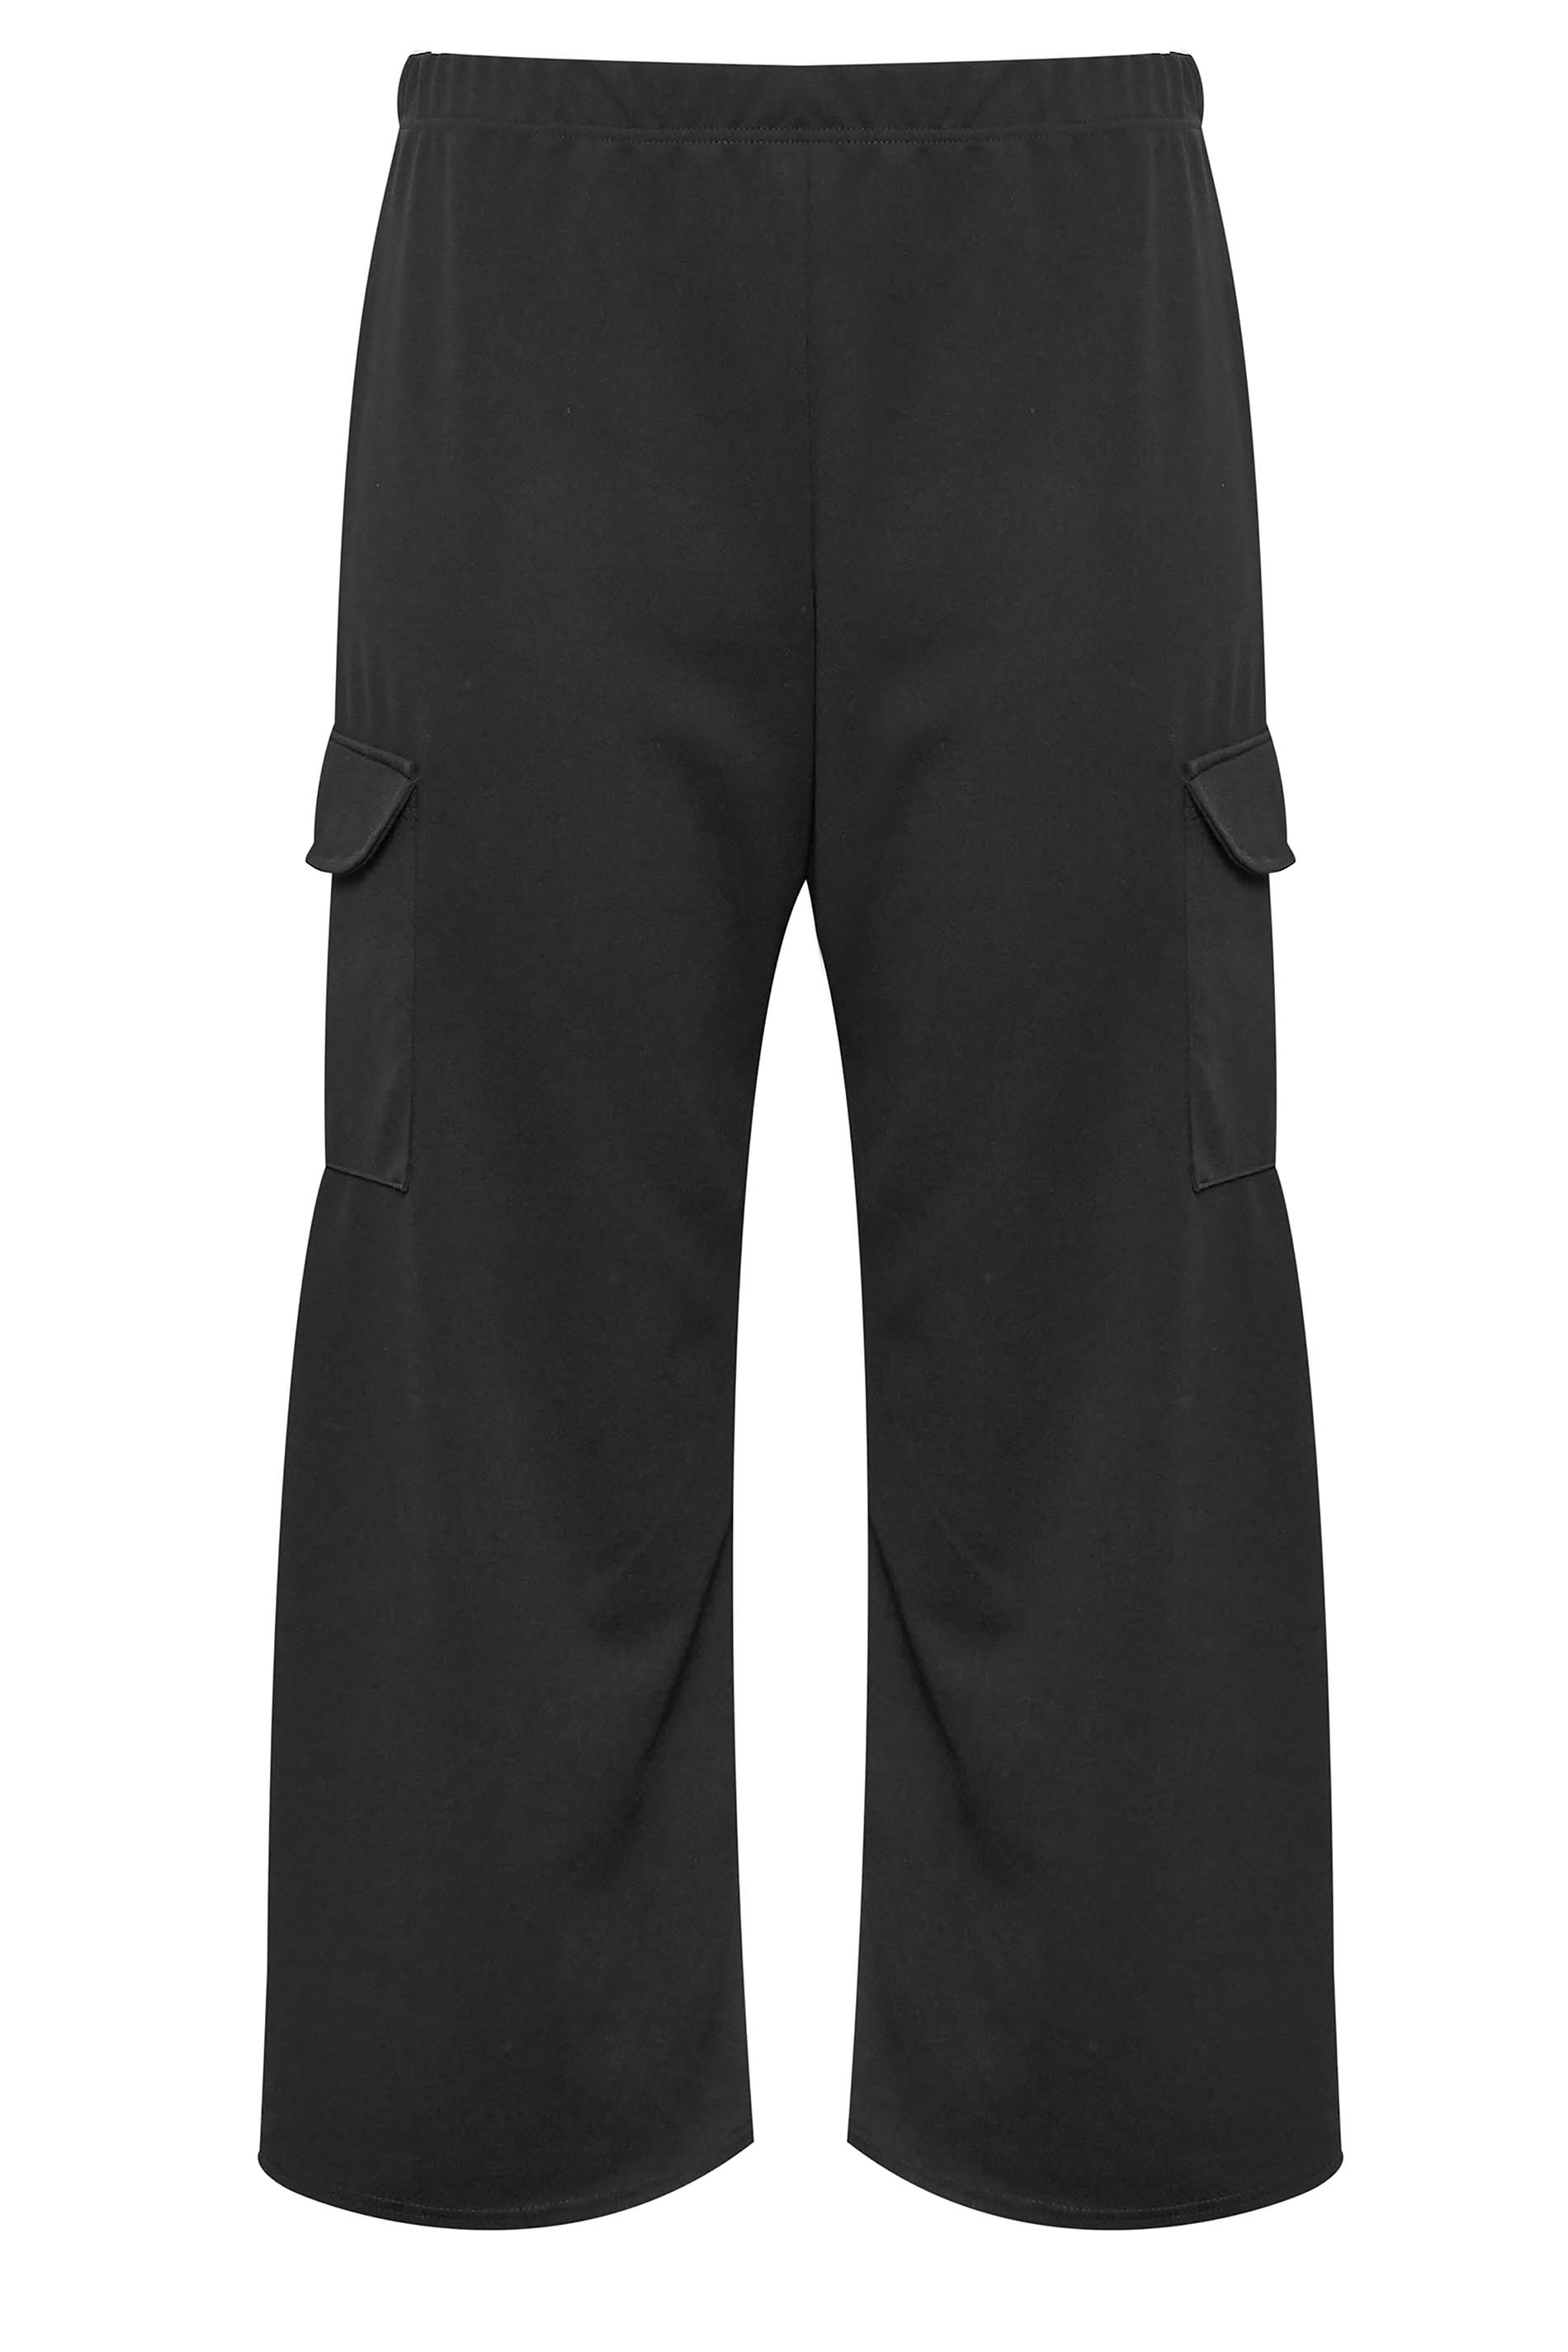 Ladies Cropped Trousers | 3/4 & Knee Length | La Redoute